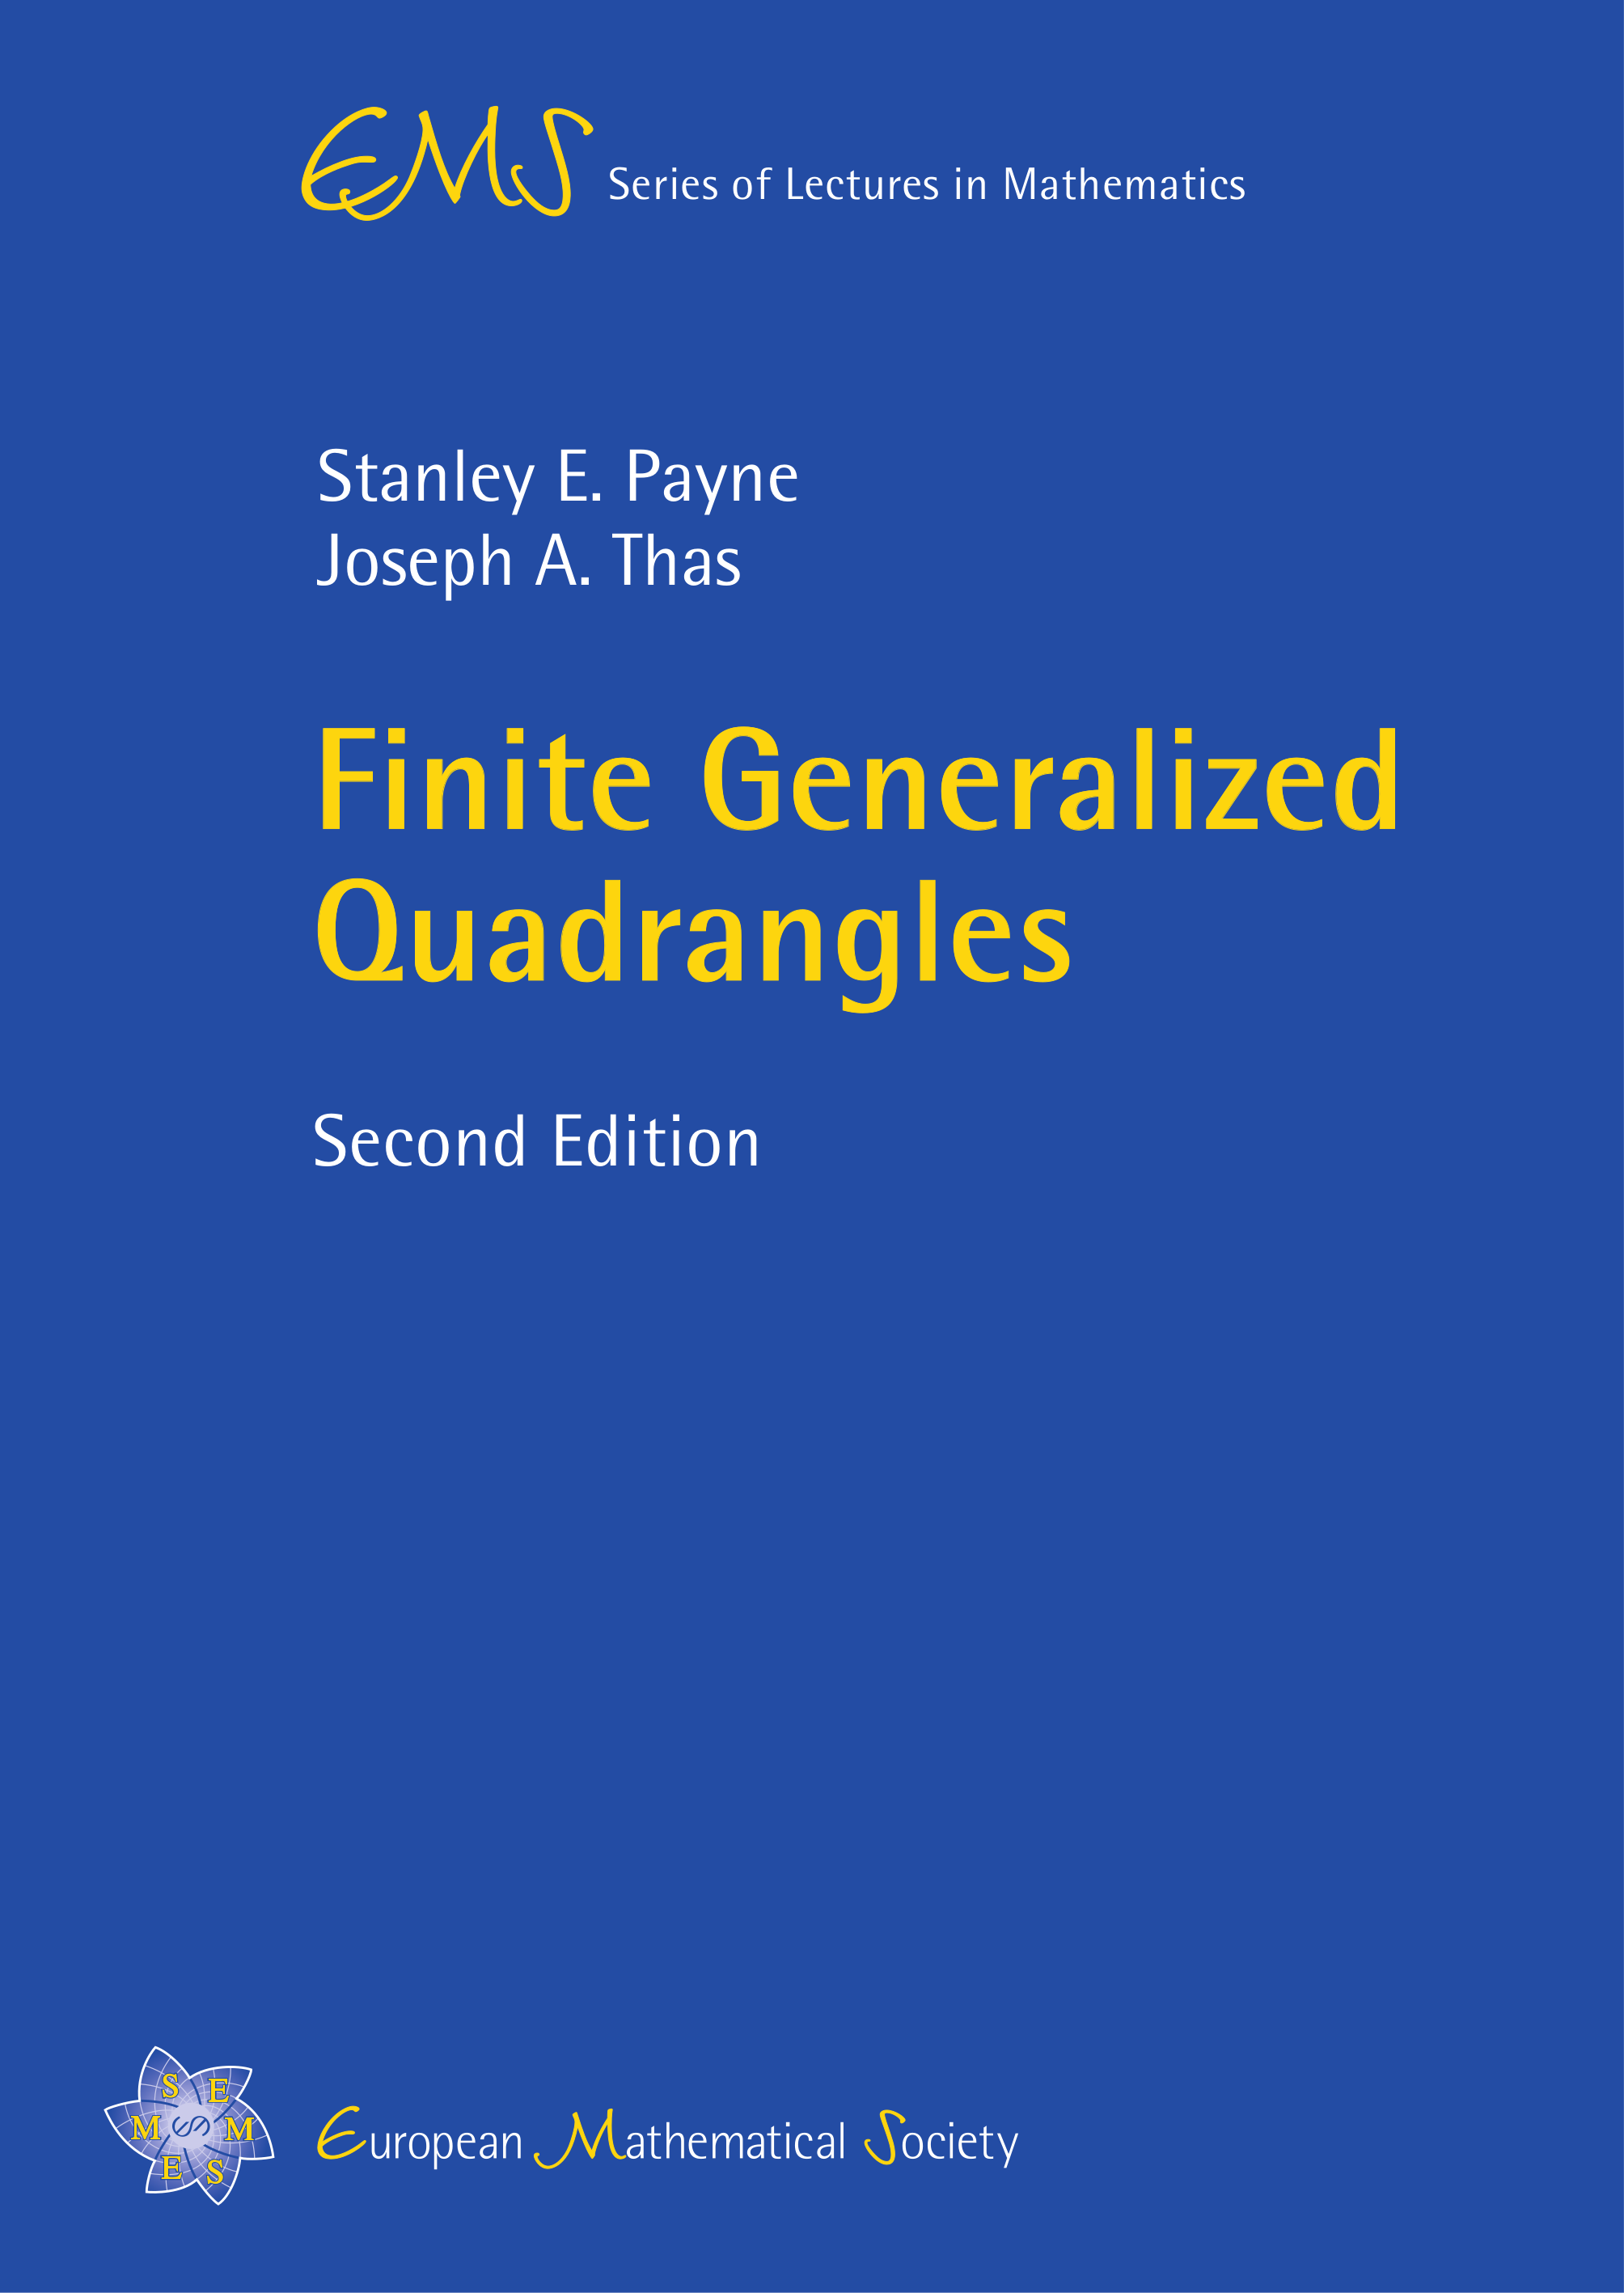 The known generalized quadrangles and their properties cover